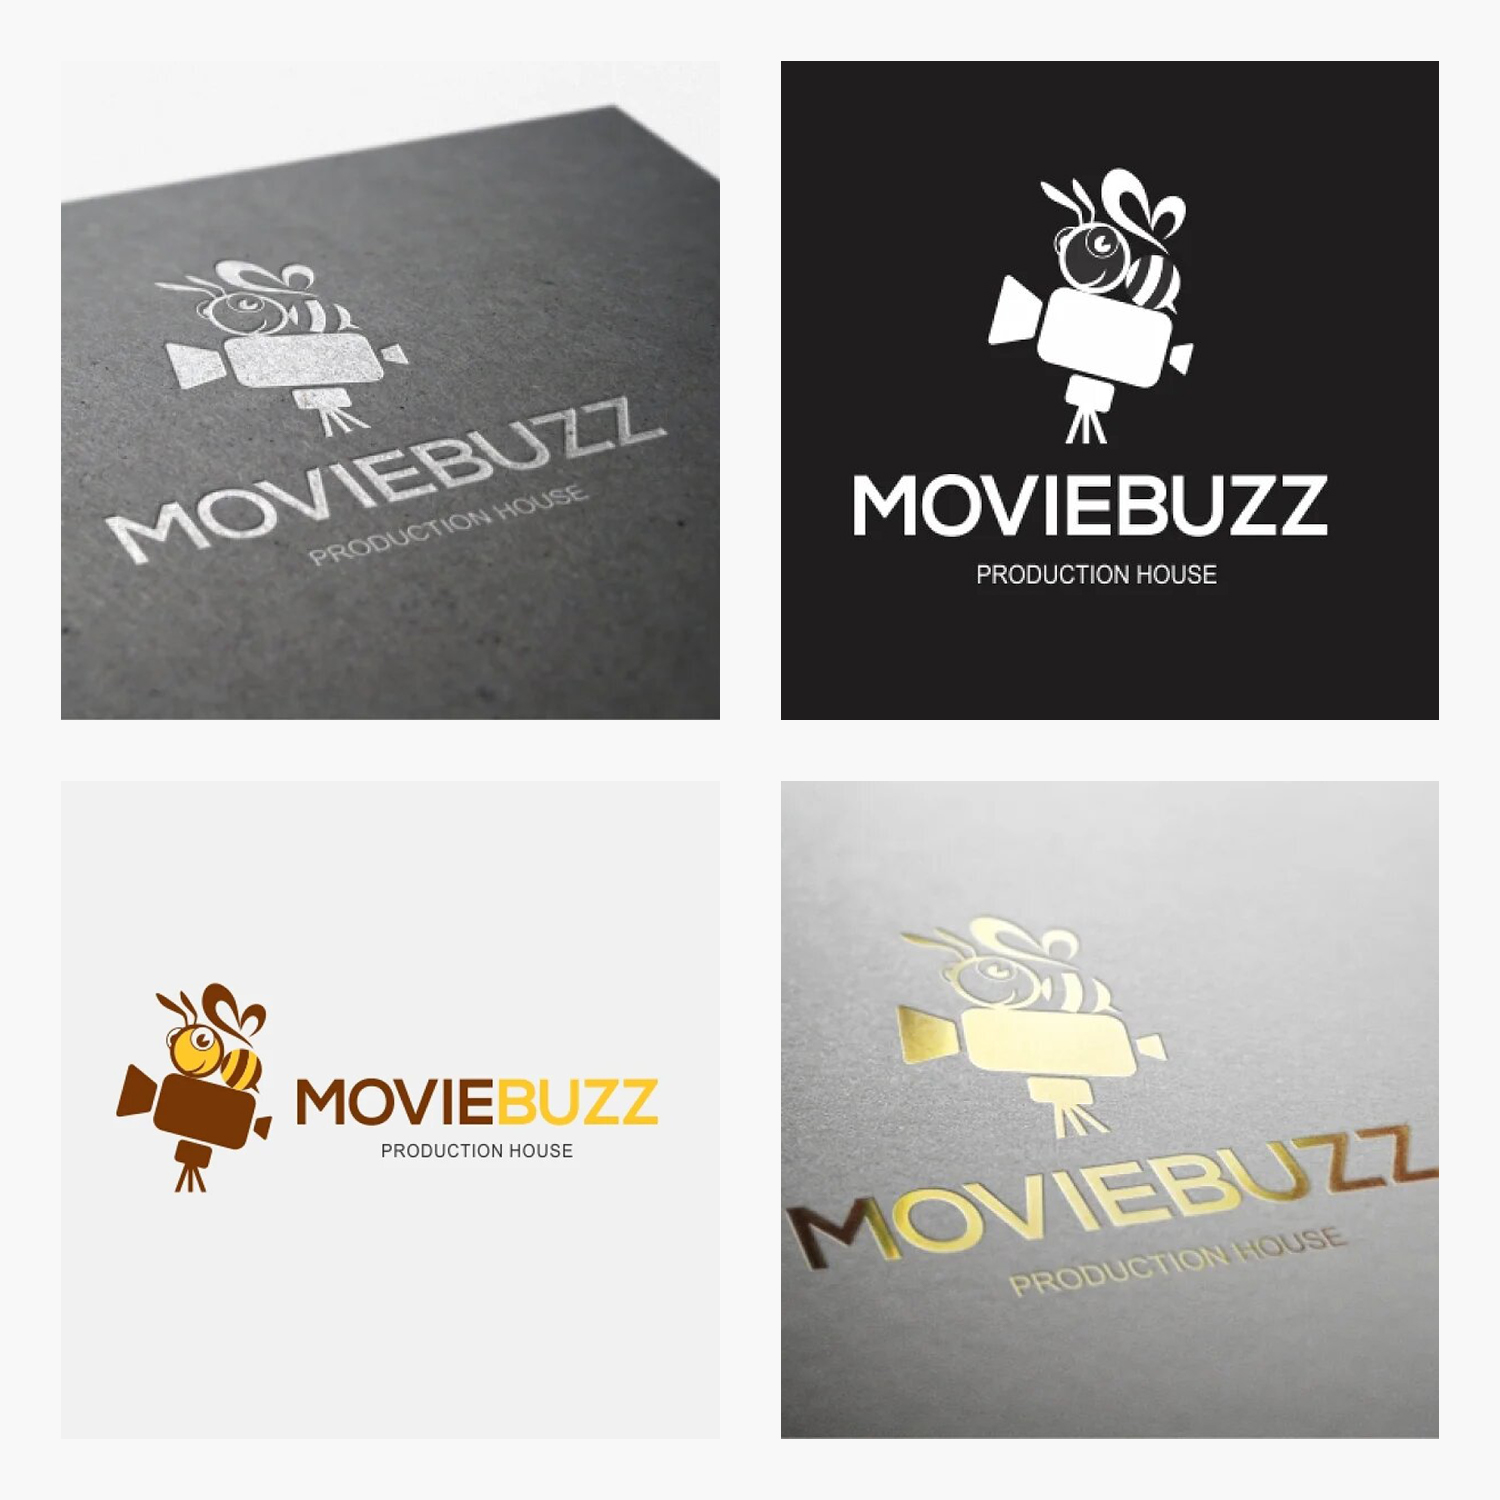 Four images of moviebuzz logos in different backgrounds and different textures.